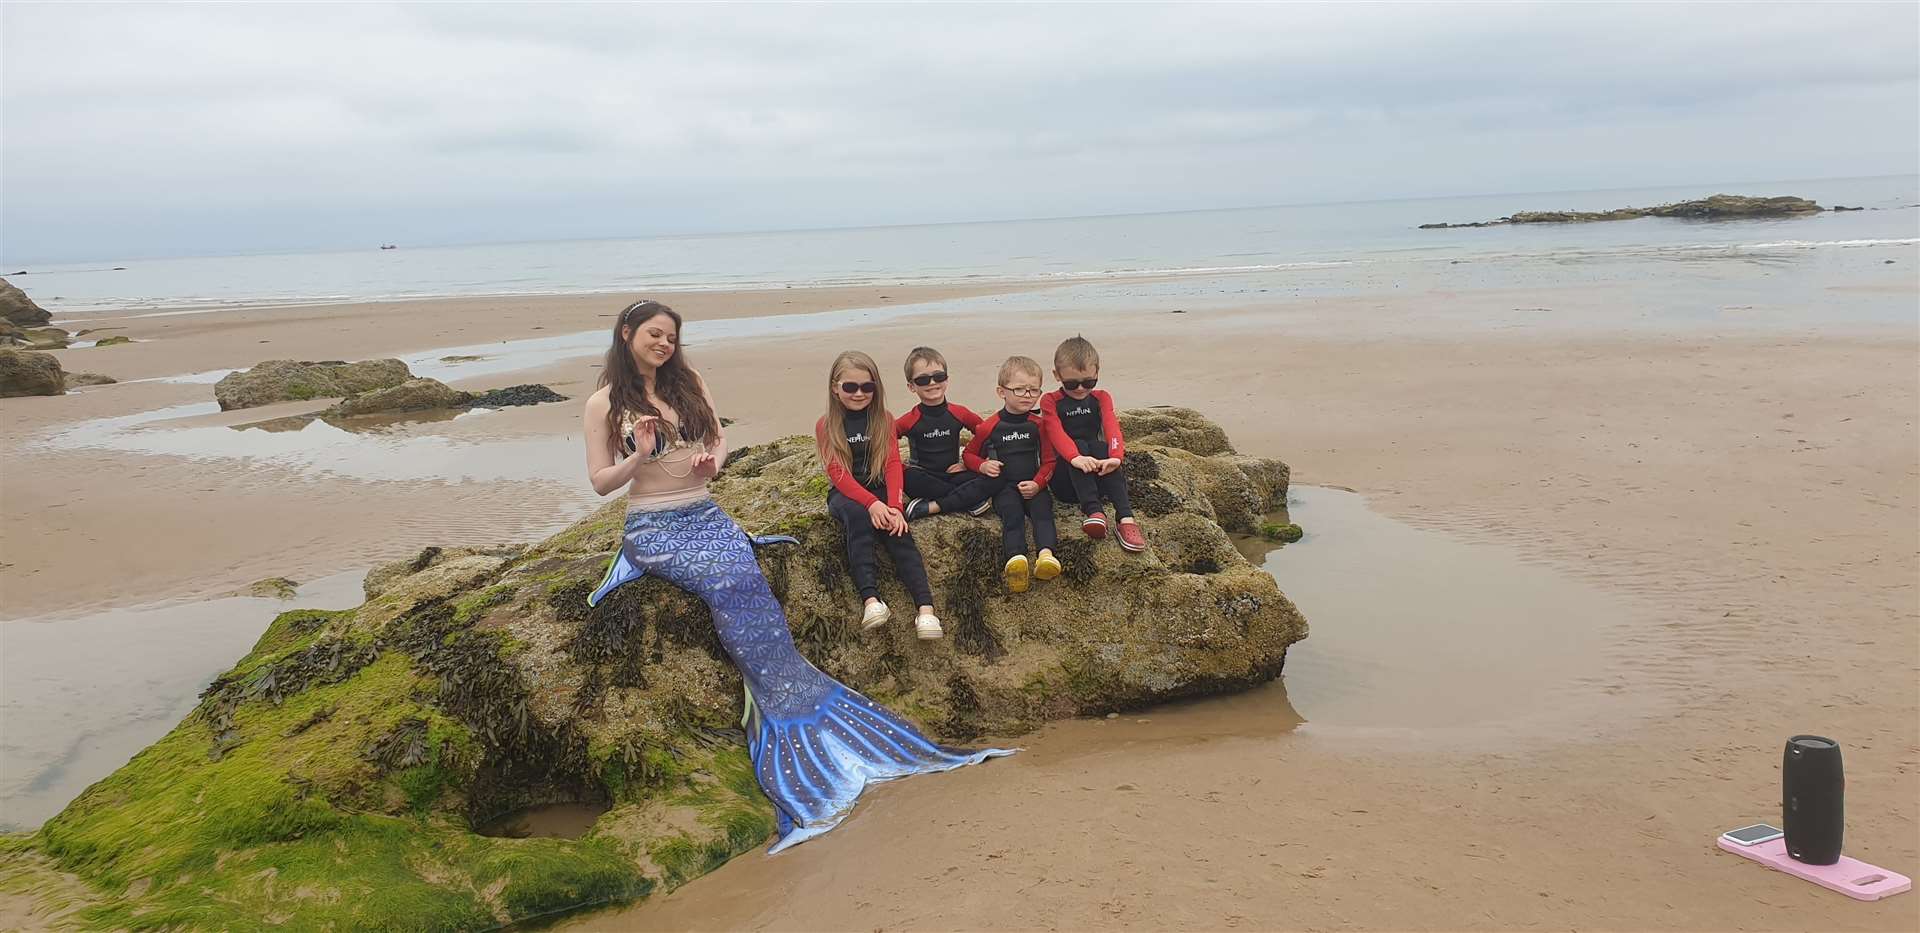 The Young family - Eilidh, Ruaridh, Aonghus and Padruig meet the Mermaid. The family, from Udny Green, are on holiday at Lossiemouth this week.